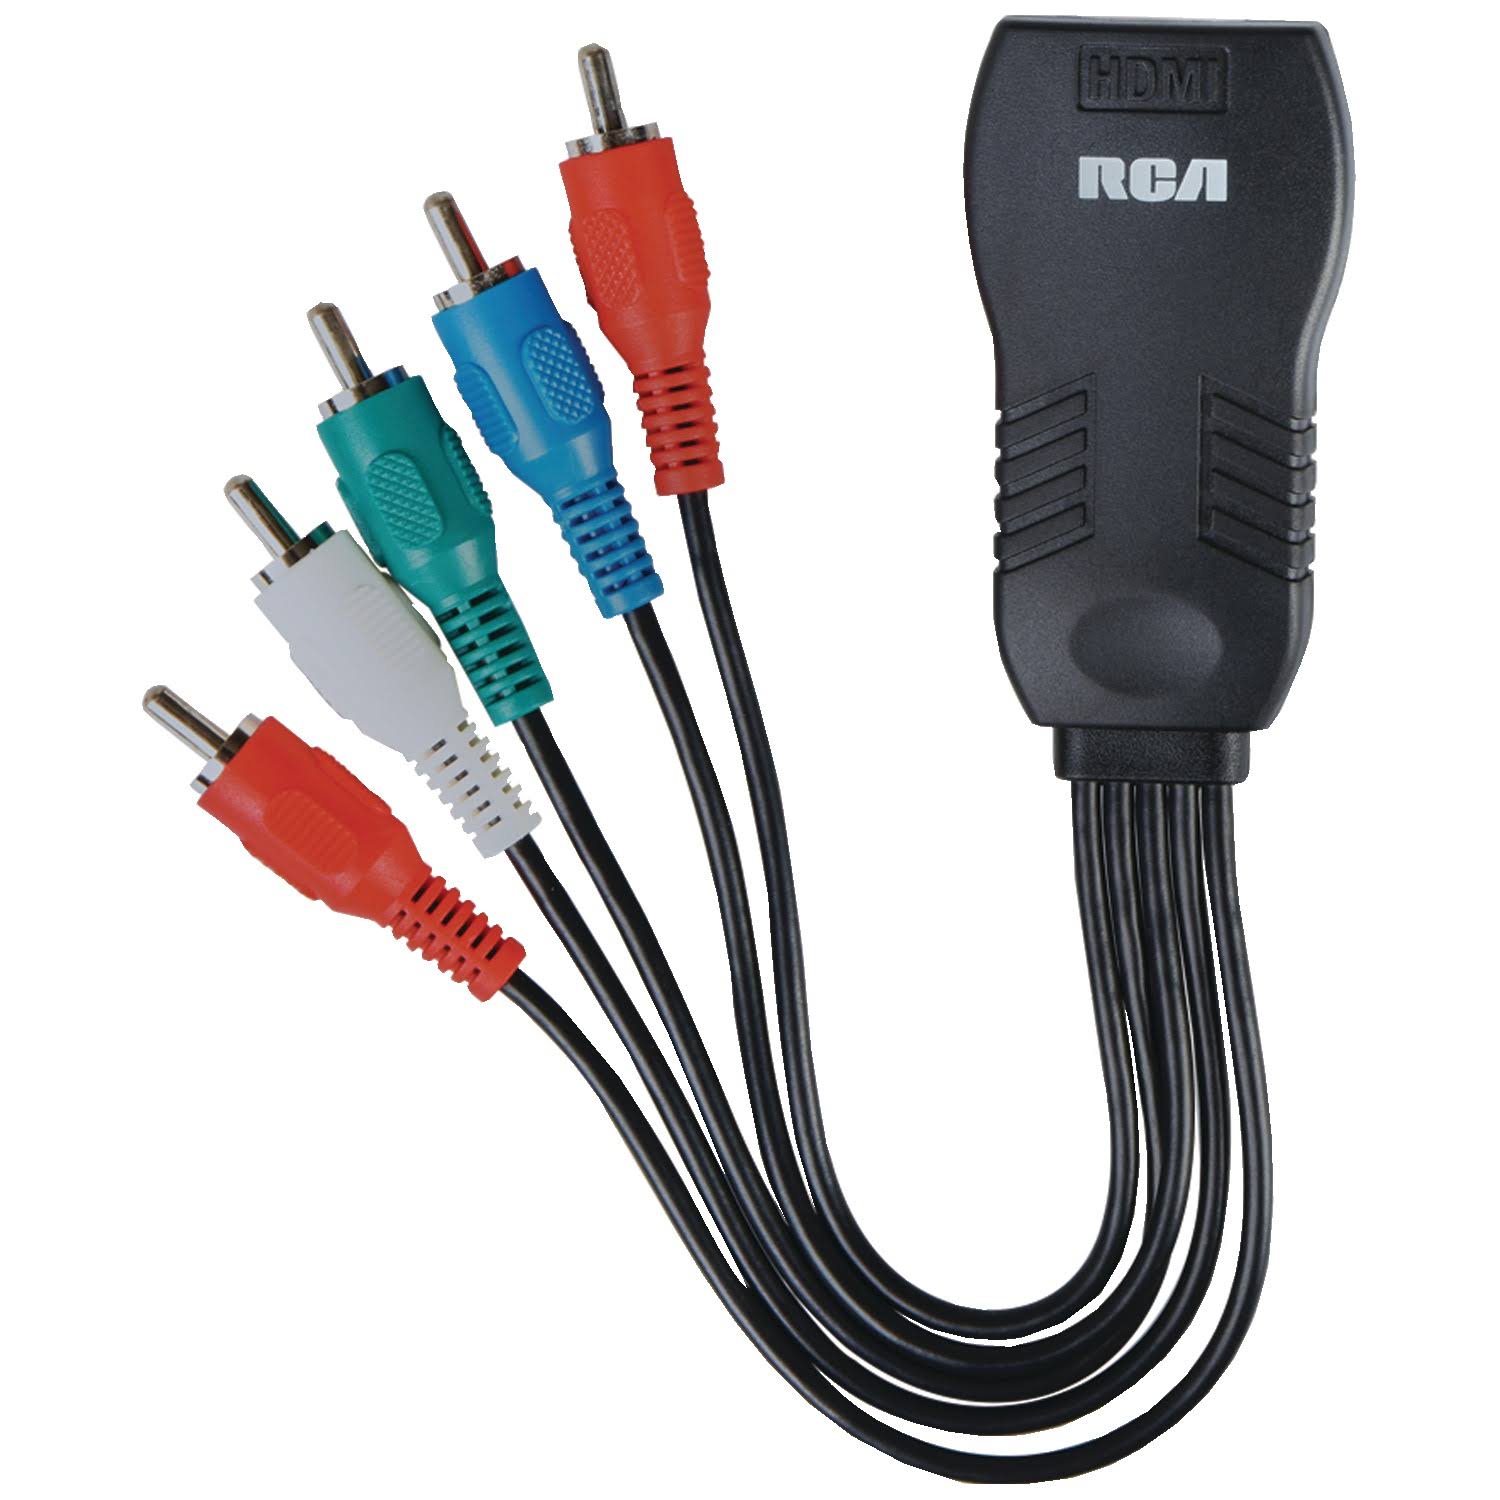 RCA Dhcopf HDMI to Component Video Adapter